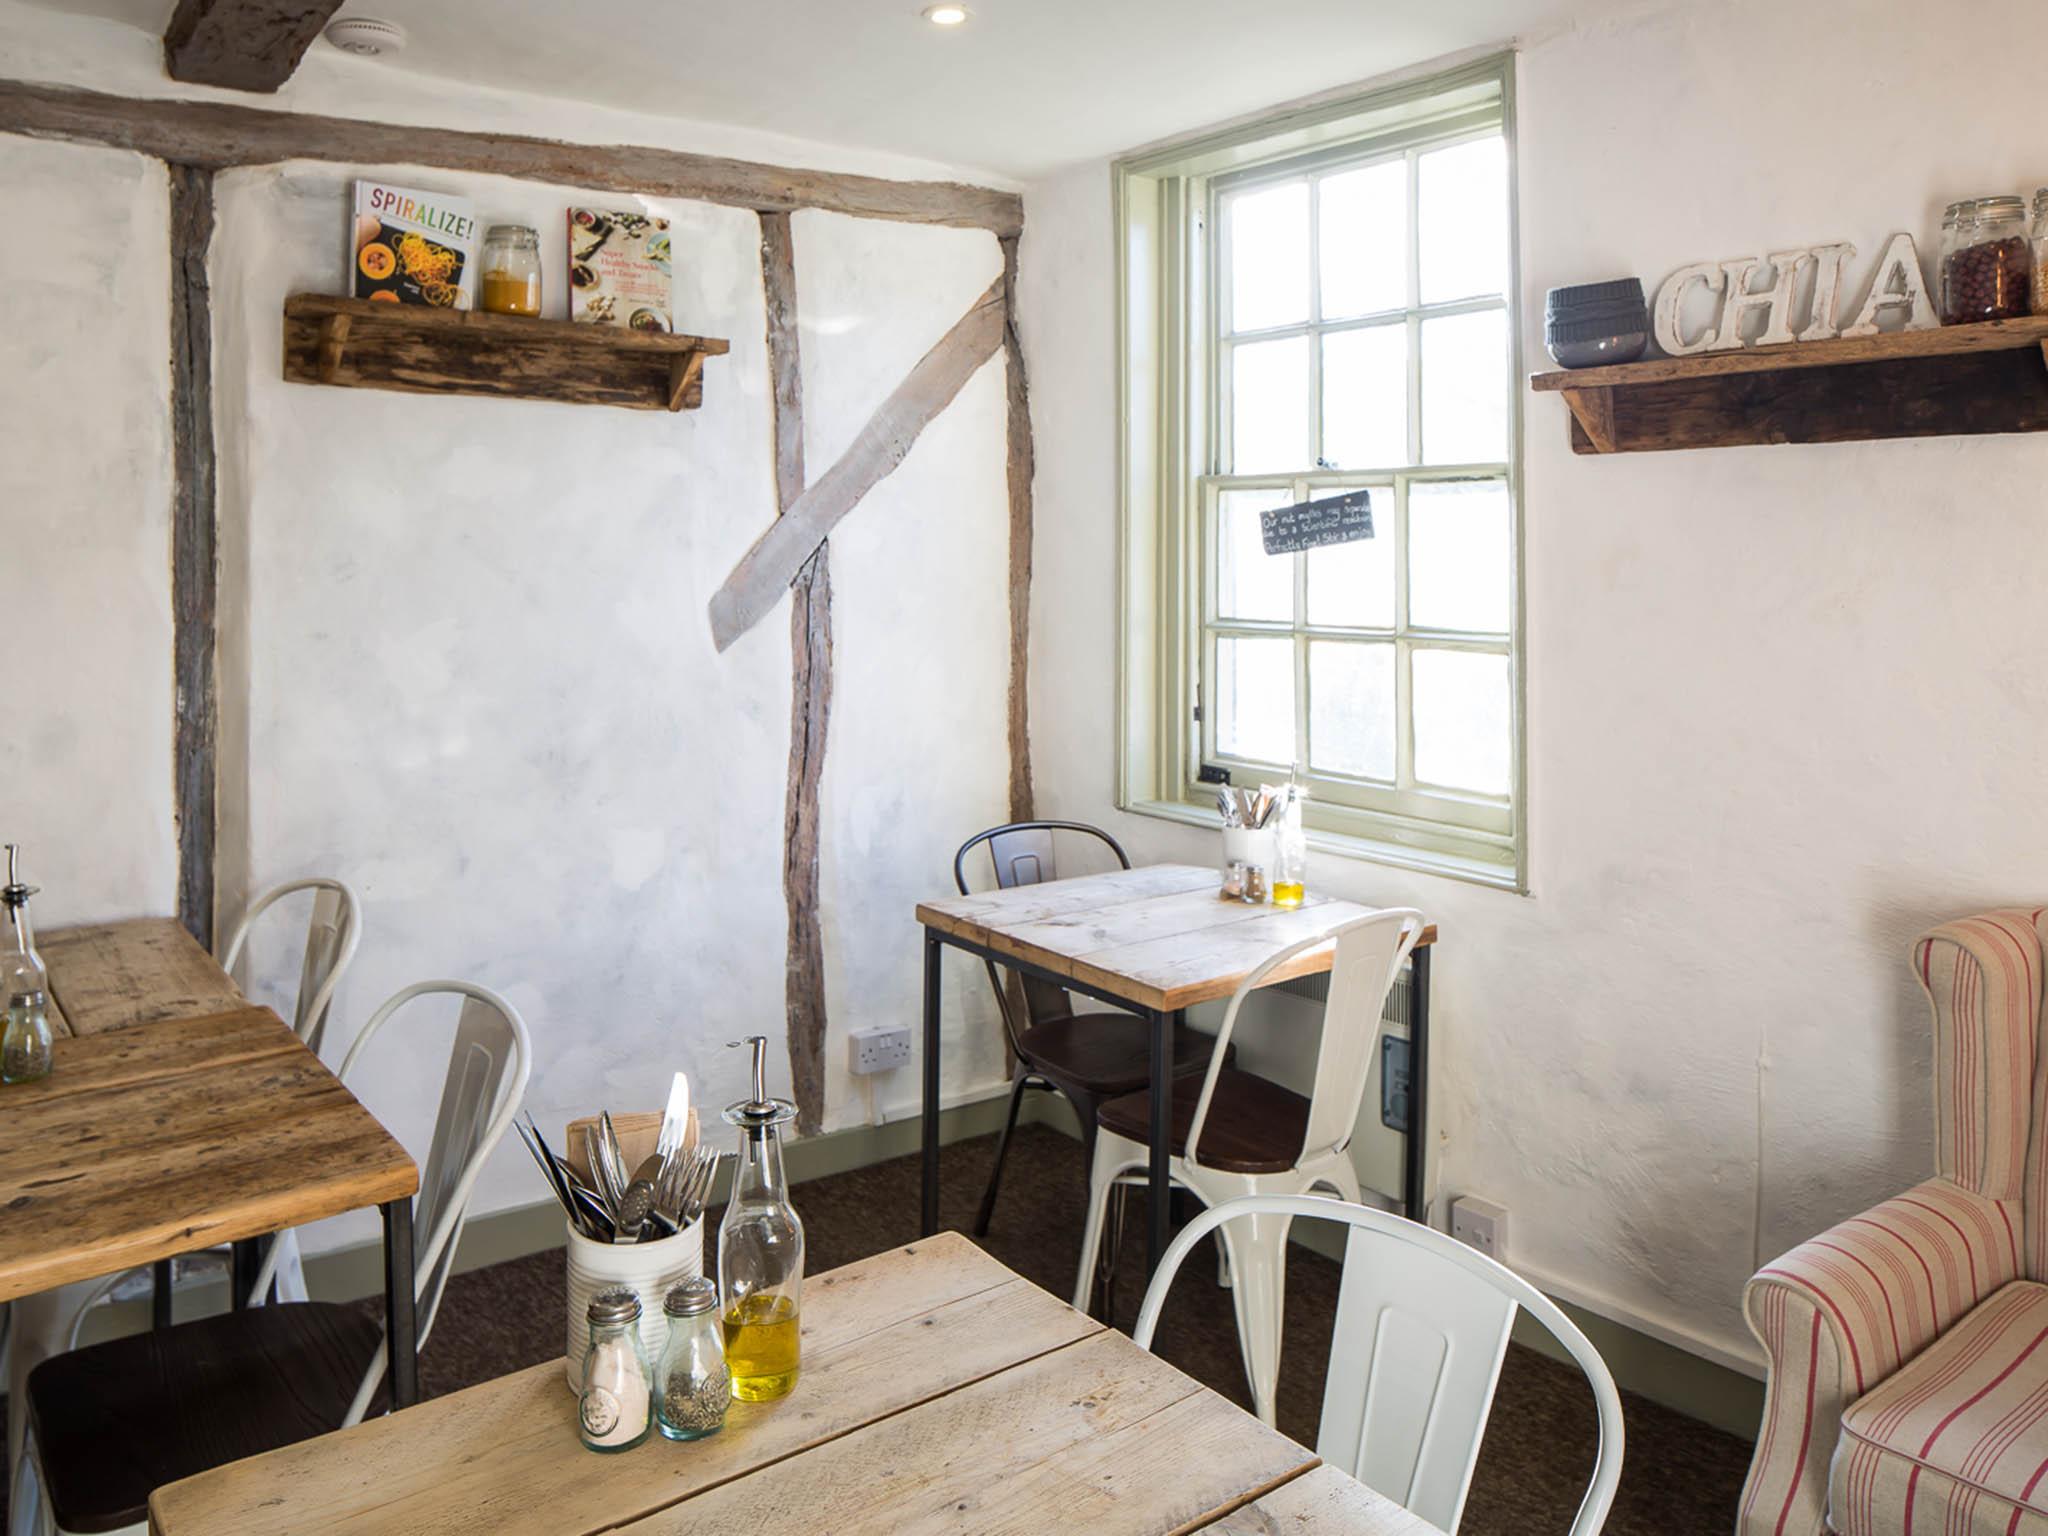 Inset wooden beams and country chic interiors make the Chai Cafe even more welcoming